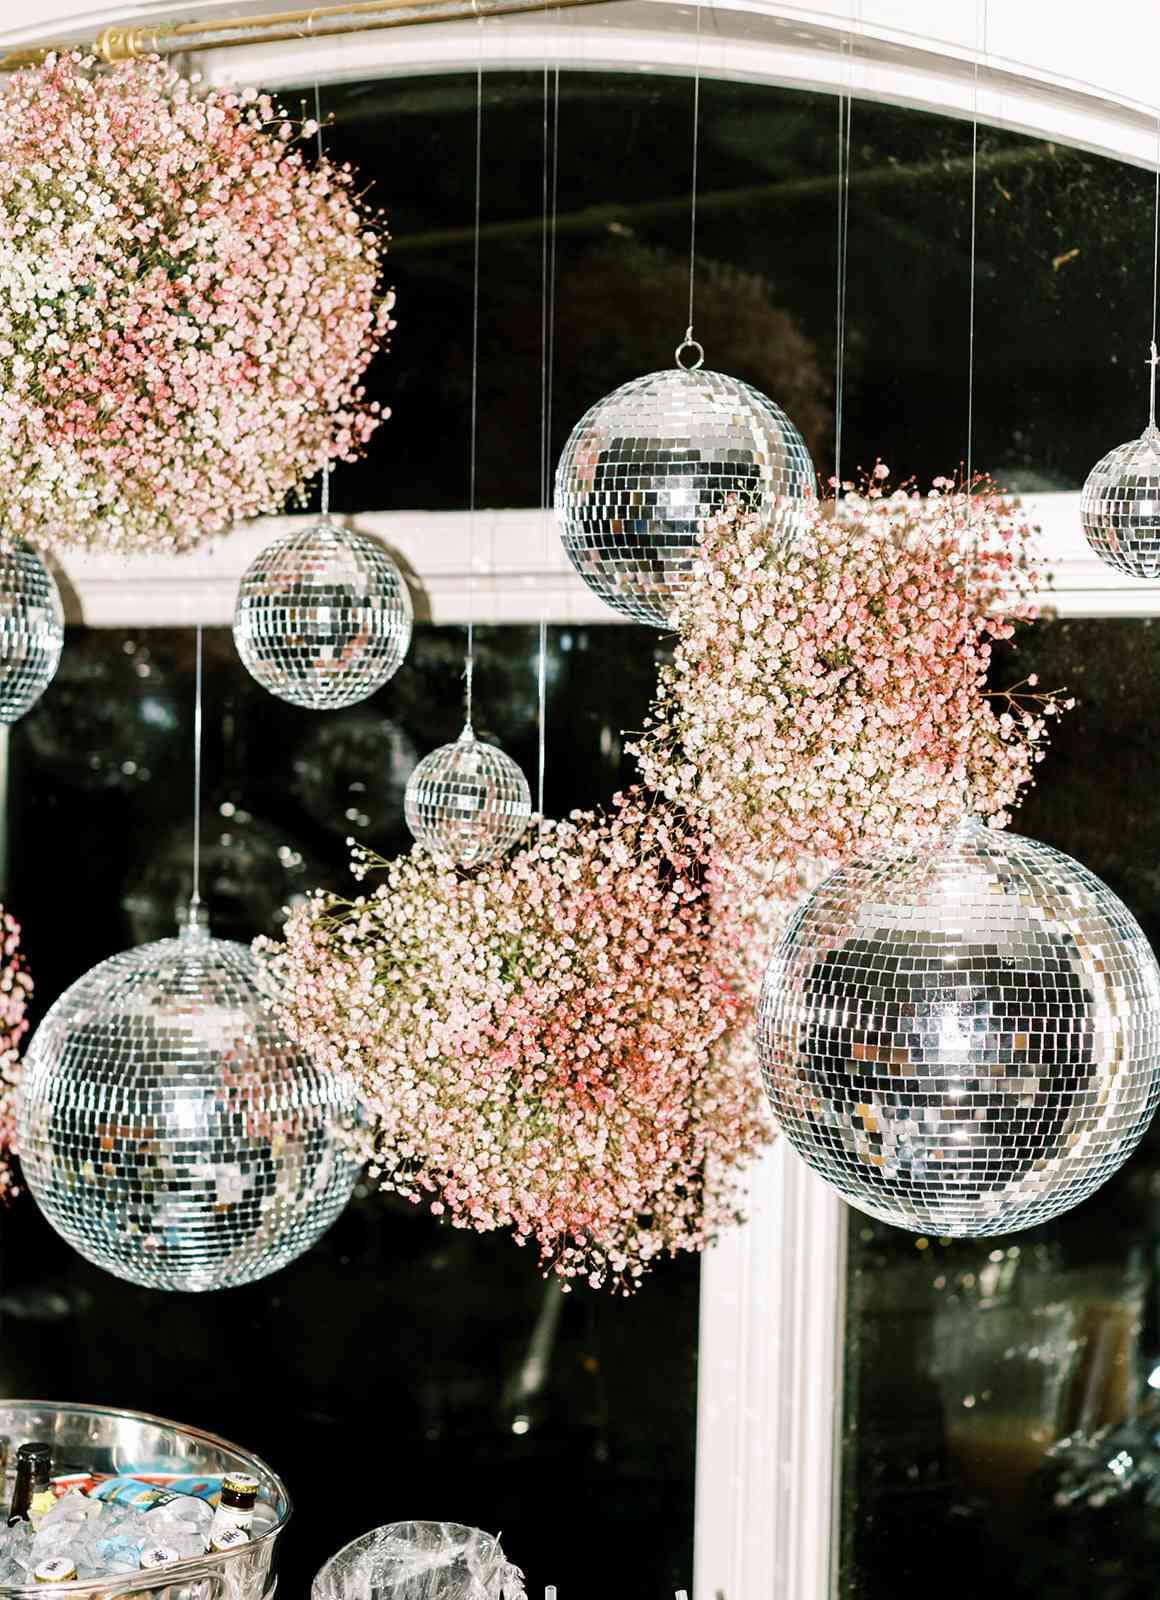 disco balls and floral arrangements hanging from ceiling